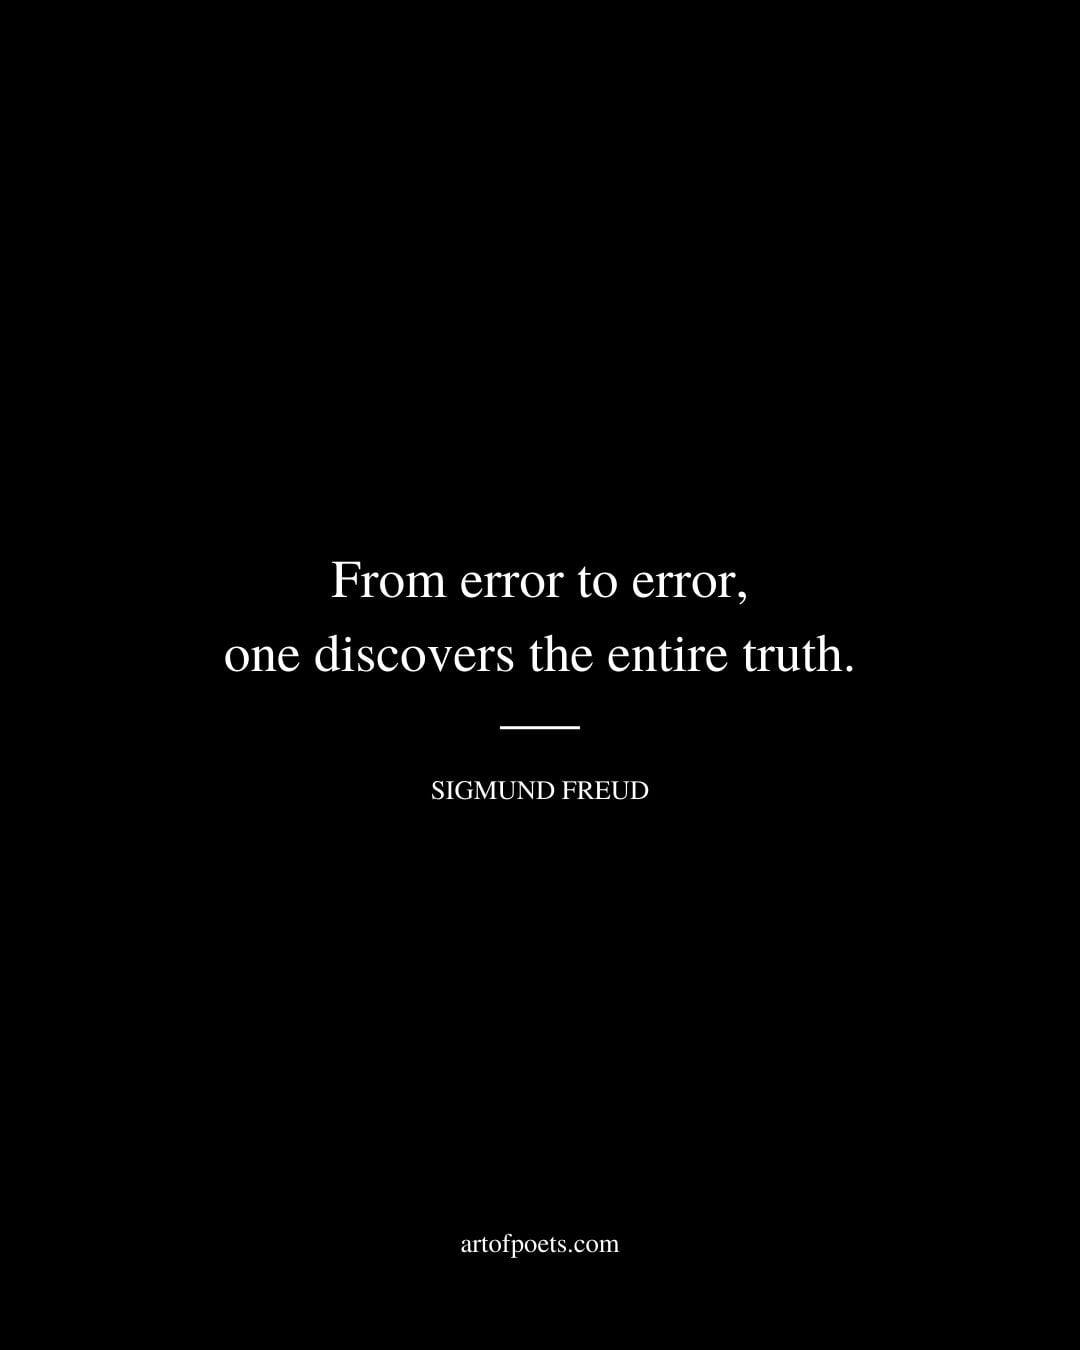 From error to error one discovers the entire truth